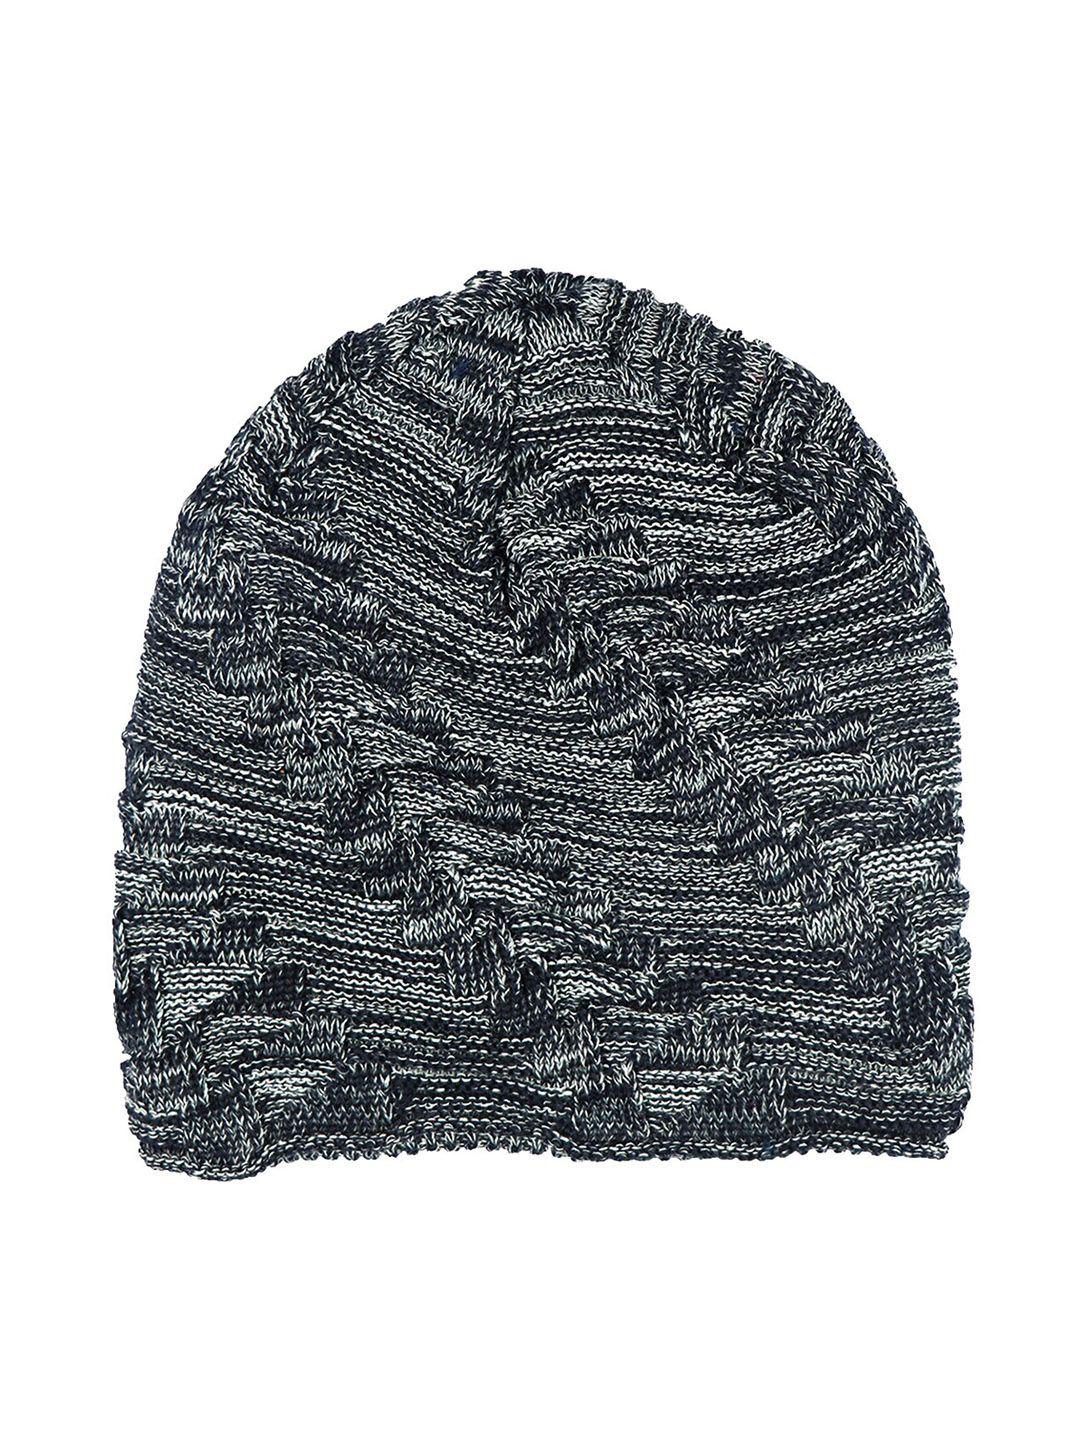 isweven unisex charcoal grey self design beanie